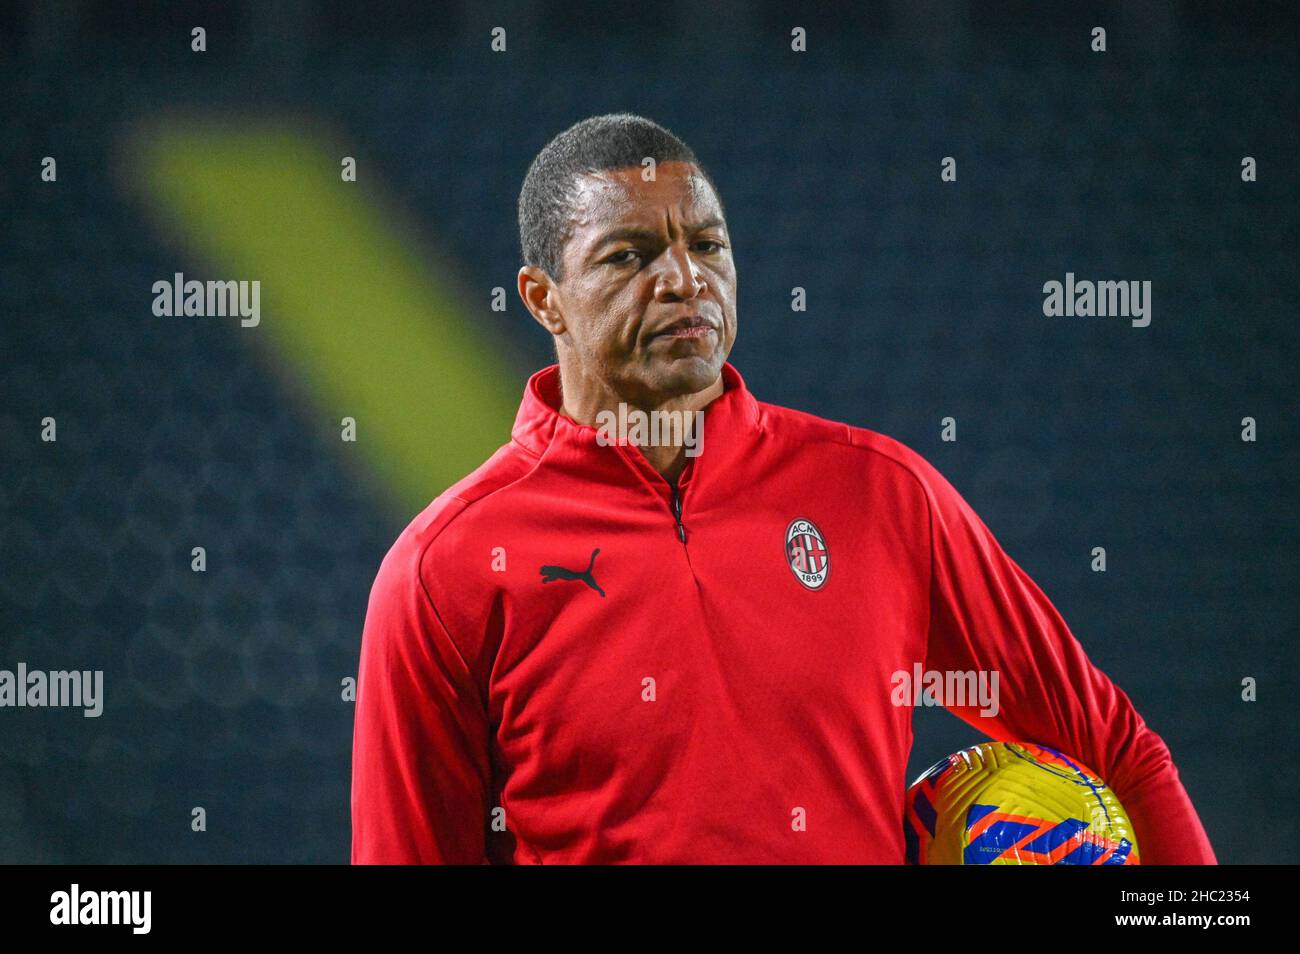 Empoli, Italy. 22nd Dec, 2021. Nelson de Jesus Silva alias Dida (Milan) goalkeeper trainer during Empoli FC vs AC Milan, italian soccer Serie A match in Empoli, Italy, December 22 2021 Credit: Independent Photo Agency/Alamy Live News Stock Photo